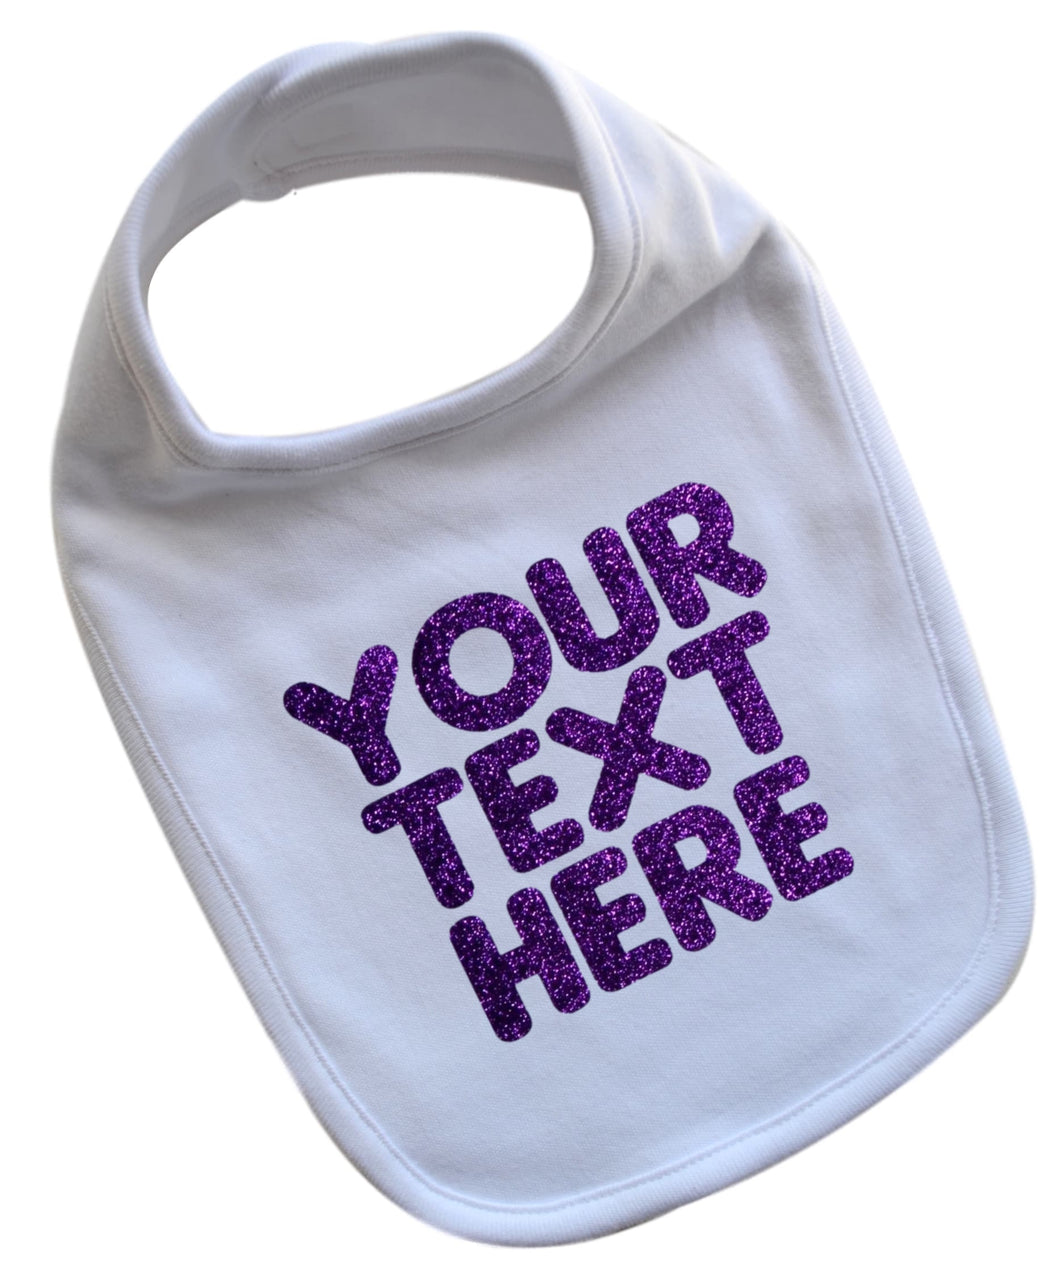 Personalized Baby Girl Bib with Custom GLITTER Text of Your Choice - Up to 3 Lines of Text!